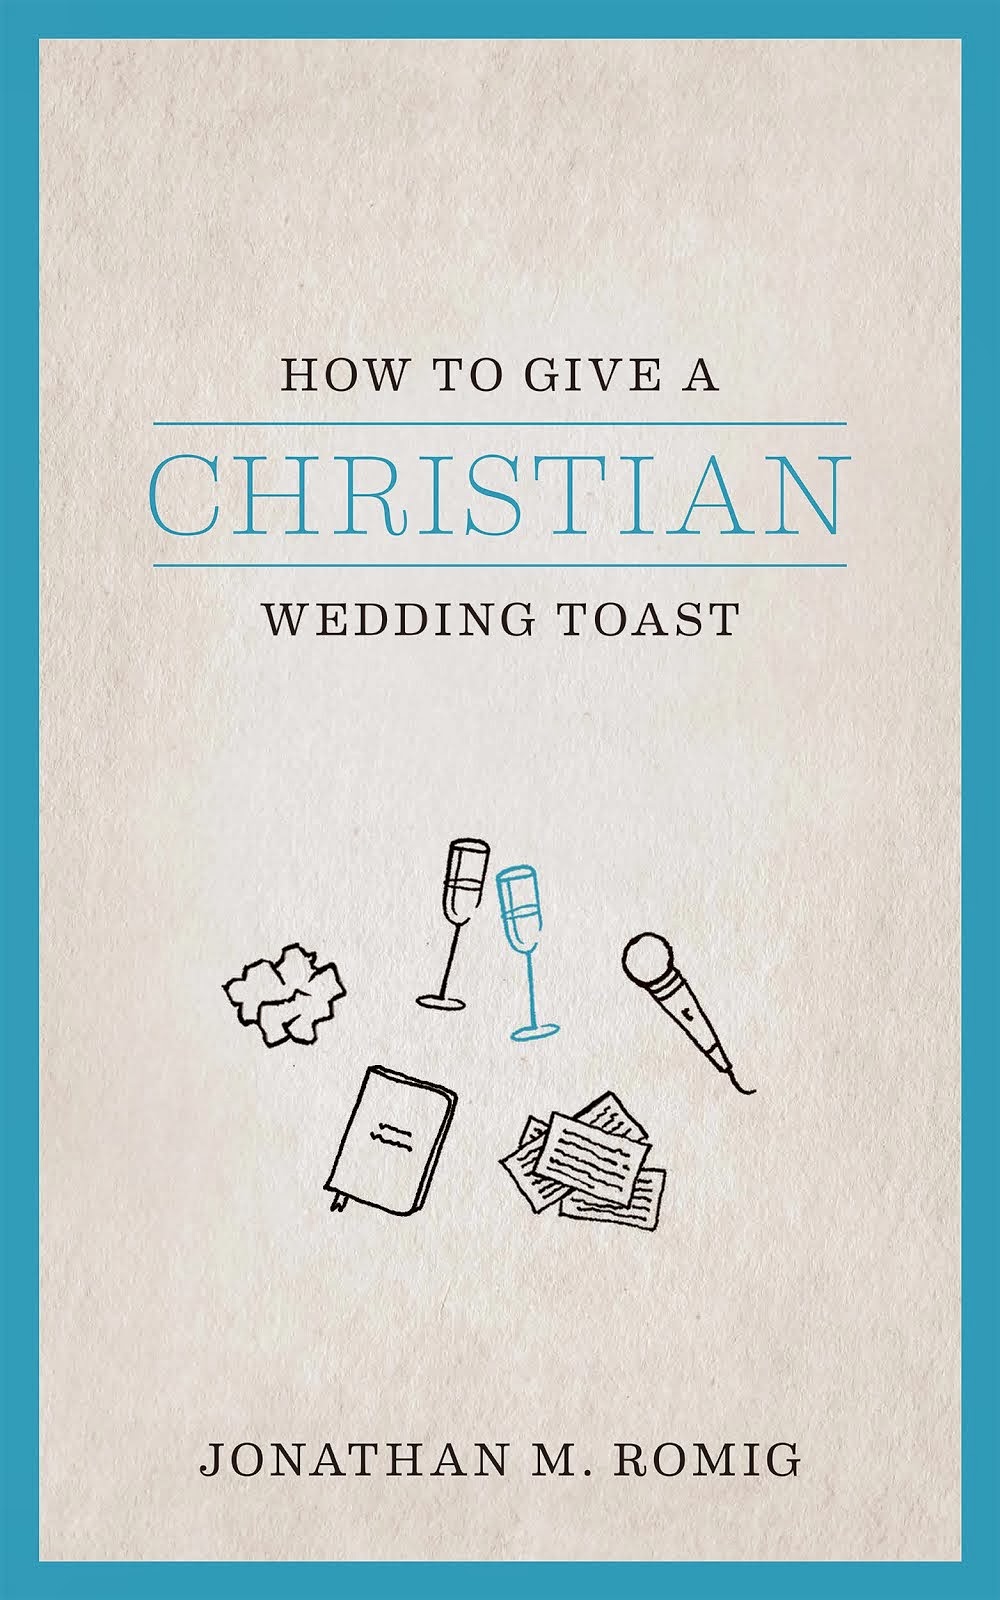 How To Give a Christian Wedding Toast (aff link)